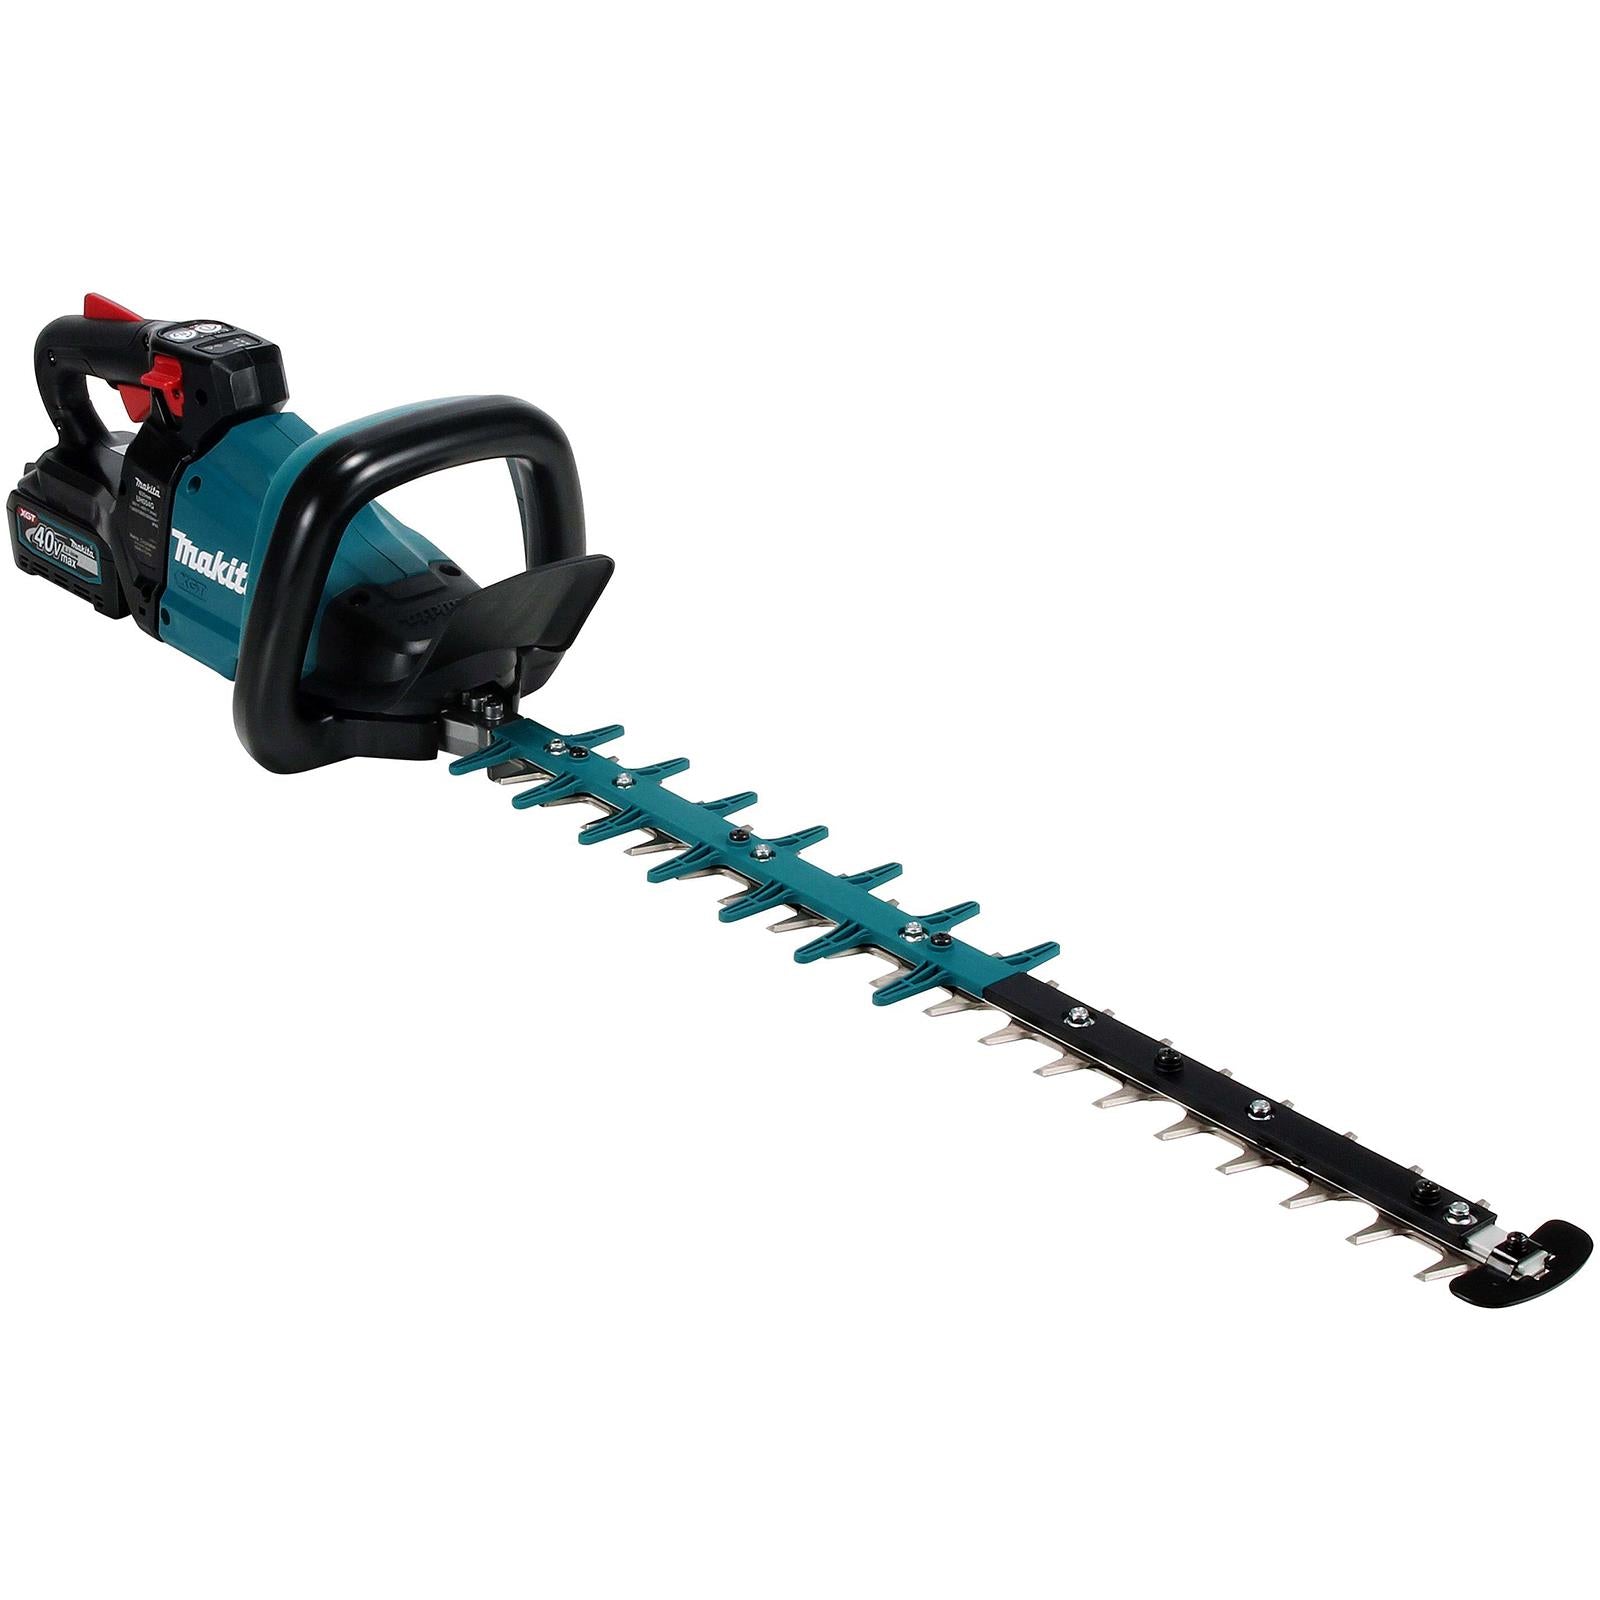 Makita Hedge Trimmer Kit 60cm 40V XGT Li-ion Brushless Cordless 2 x 2.5Ah Battery and Rapid Charger Garden Bush Cutter Cutting UH004GD201